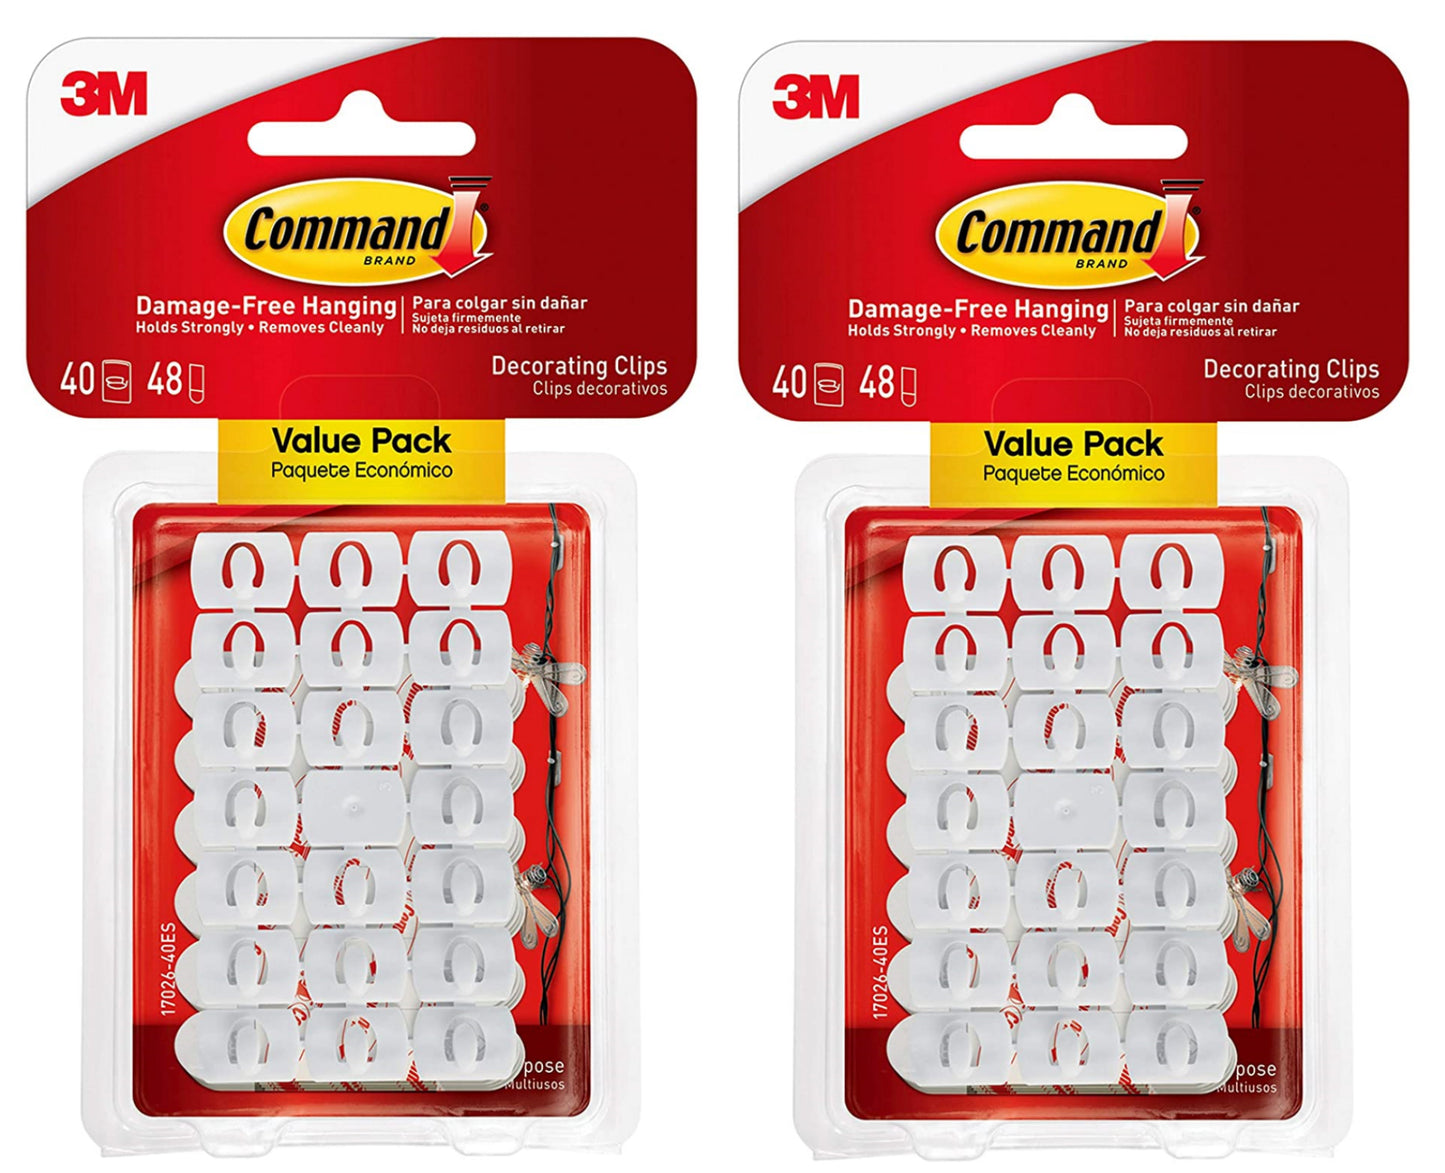 Command White Light Clips, Decorate Damage-Free Easy to Apply and Remove - Pack of 2